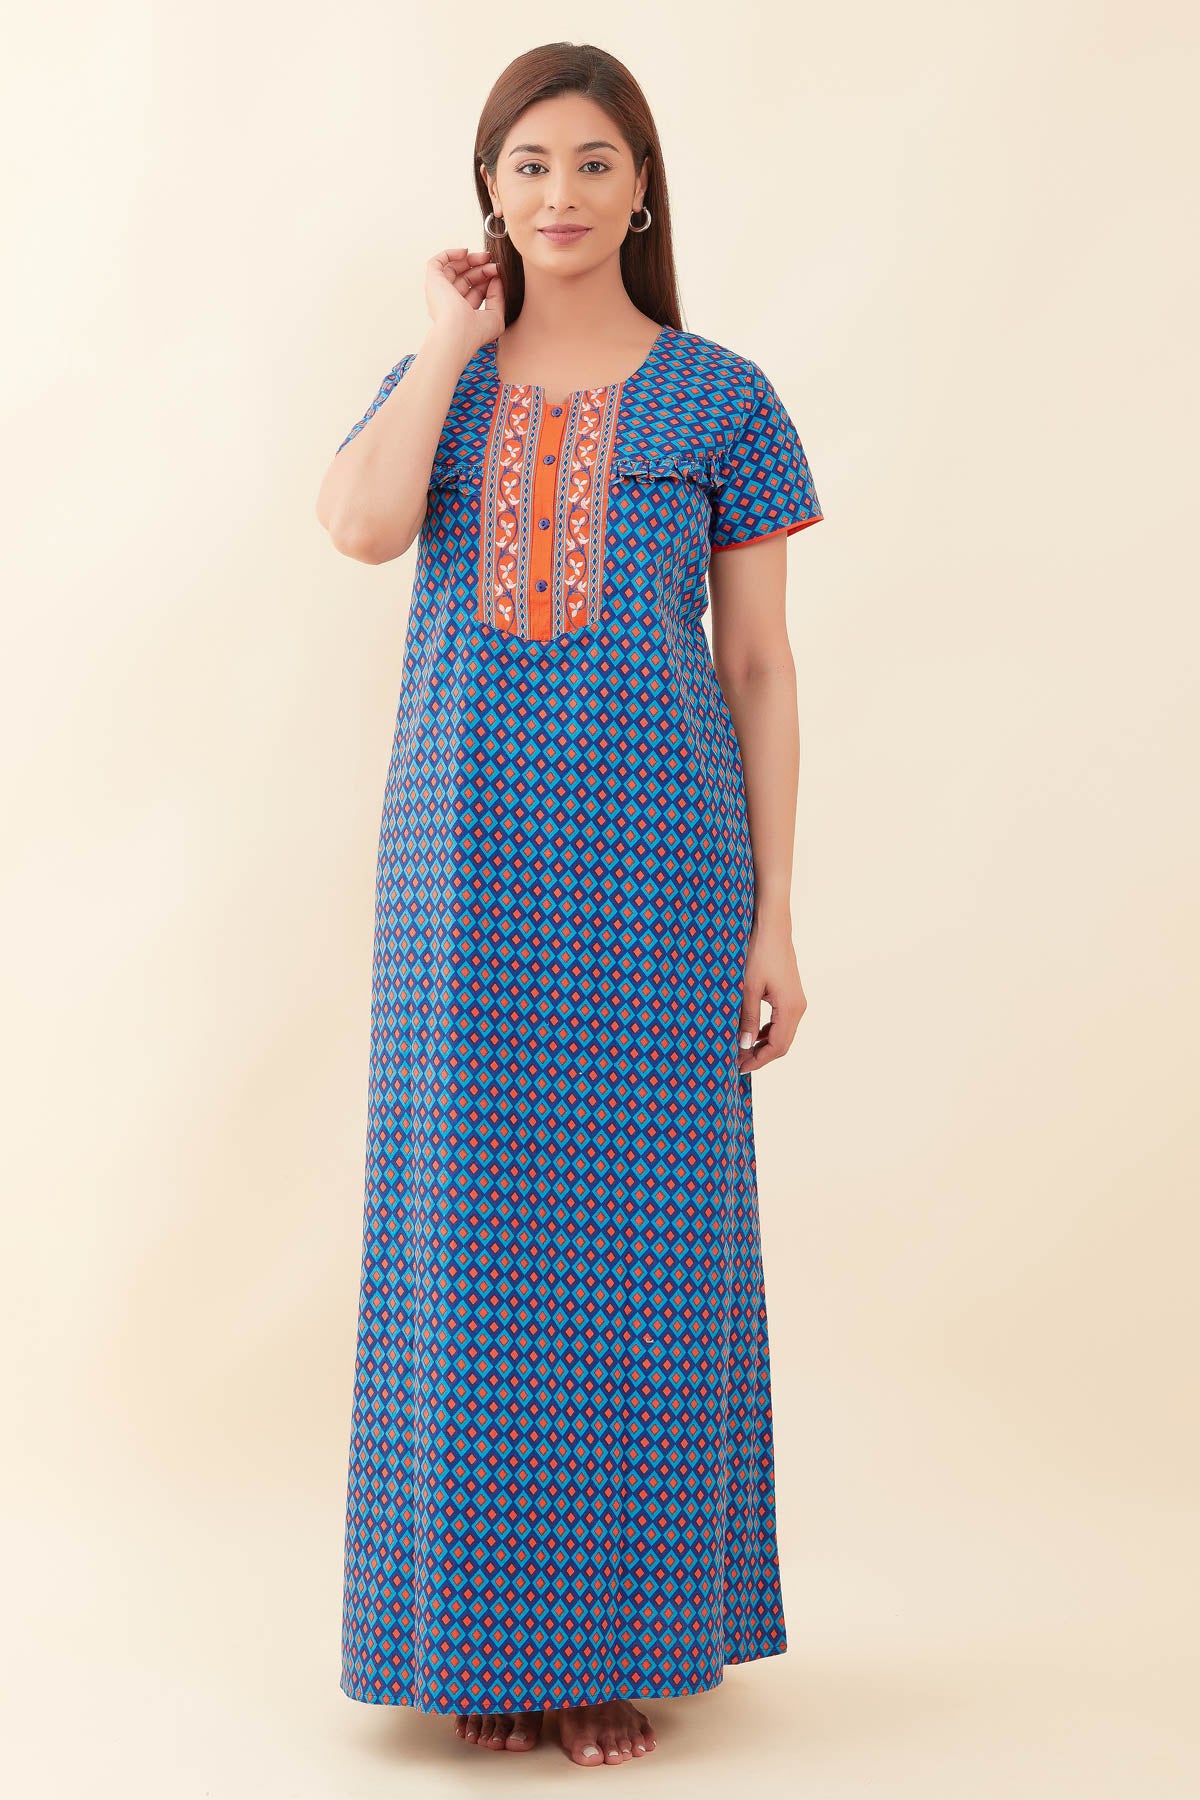 All Over Geometric Printed With Pleat Embellished Yoke Nighty - Blue